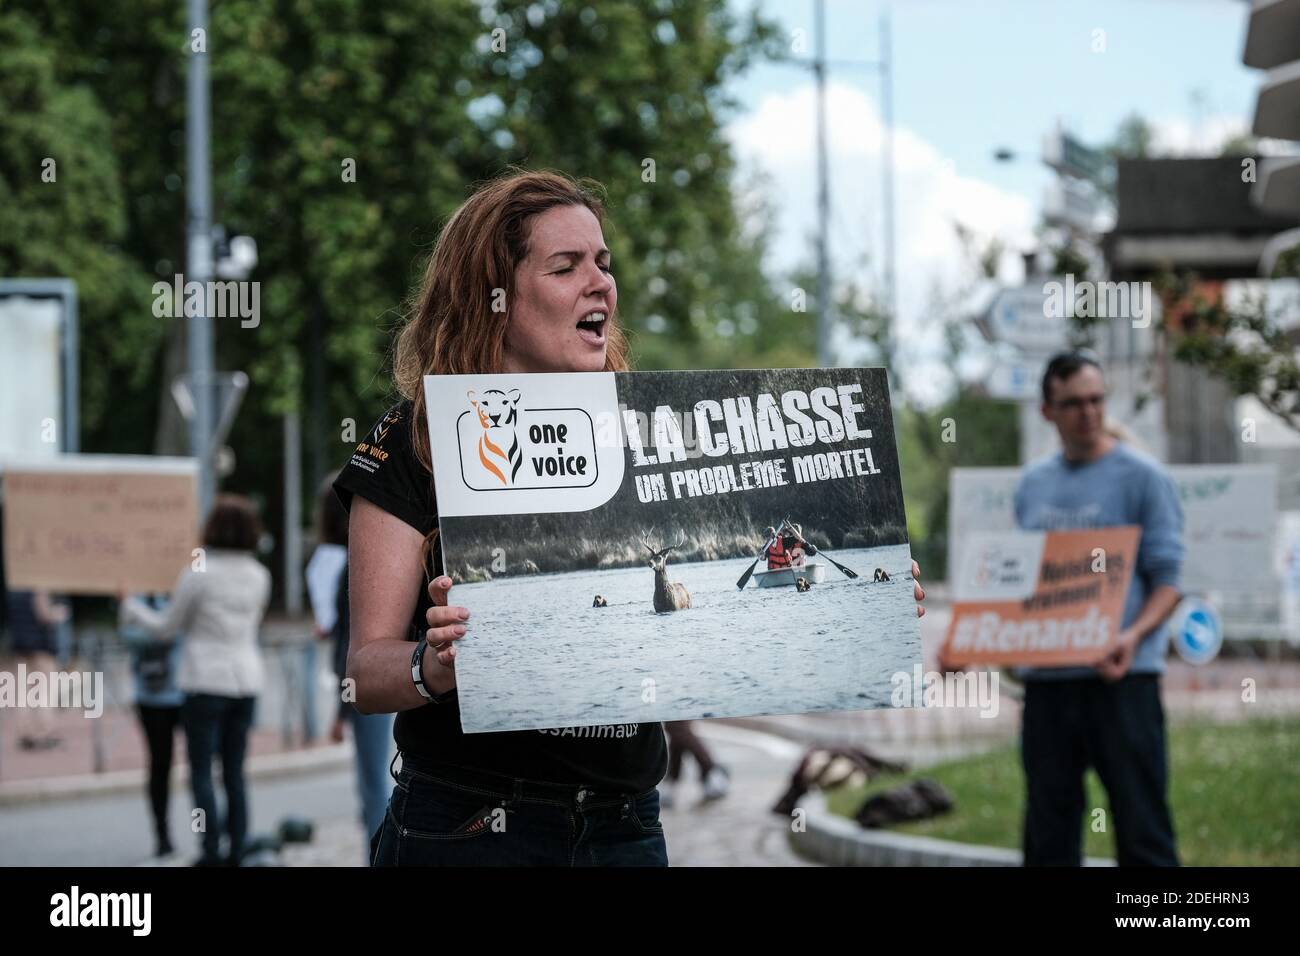 Placard 'Hunting, a deadly problem' (La chasse, un problème mortel). Protesters from the association for the defense of the animal cause 'One voice' disrupted the Regional Hunters Fair in Toulouse, southern France on May 25, 2019. Photo by Patrick Batard/ABACAPRESS.COM Stock Photo